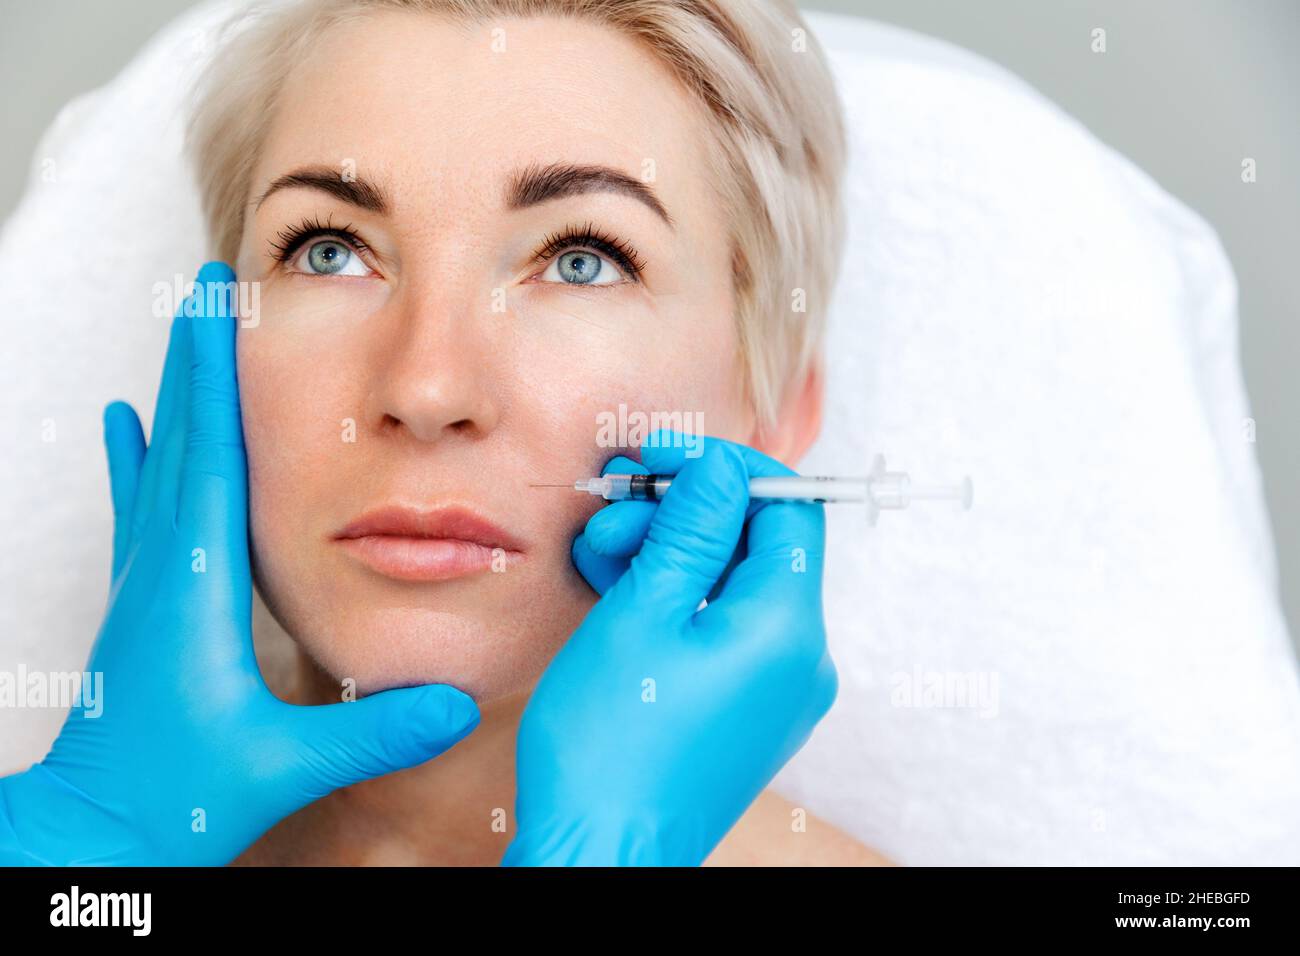 Beautician in medical gloves with syringe injects filler in nasolabial fold. Close-up portrait of beautiful adult woman getting injection in the cosme Stock Photo